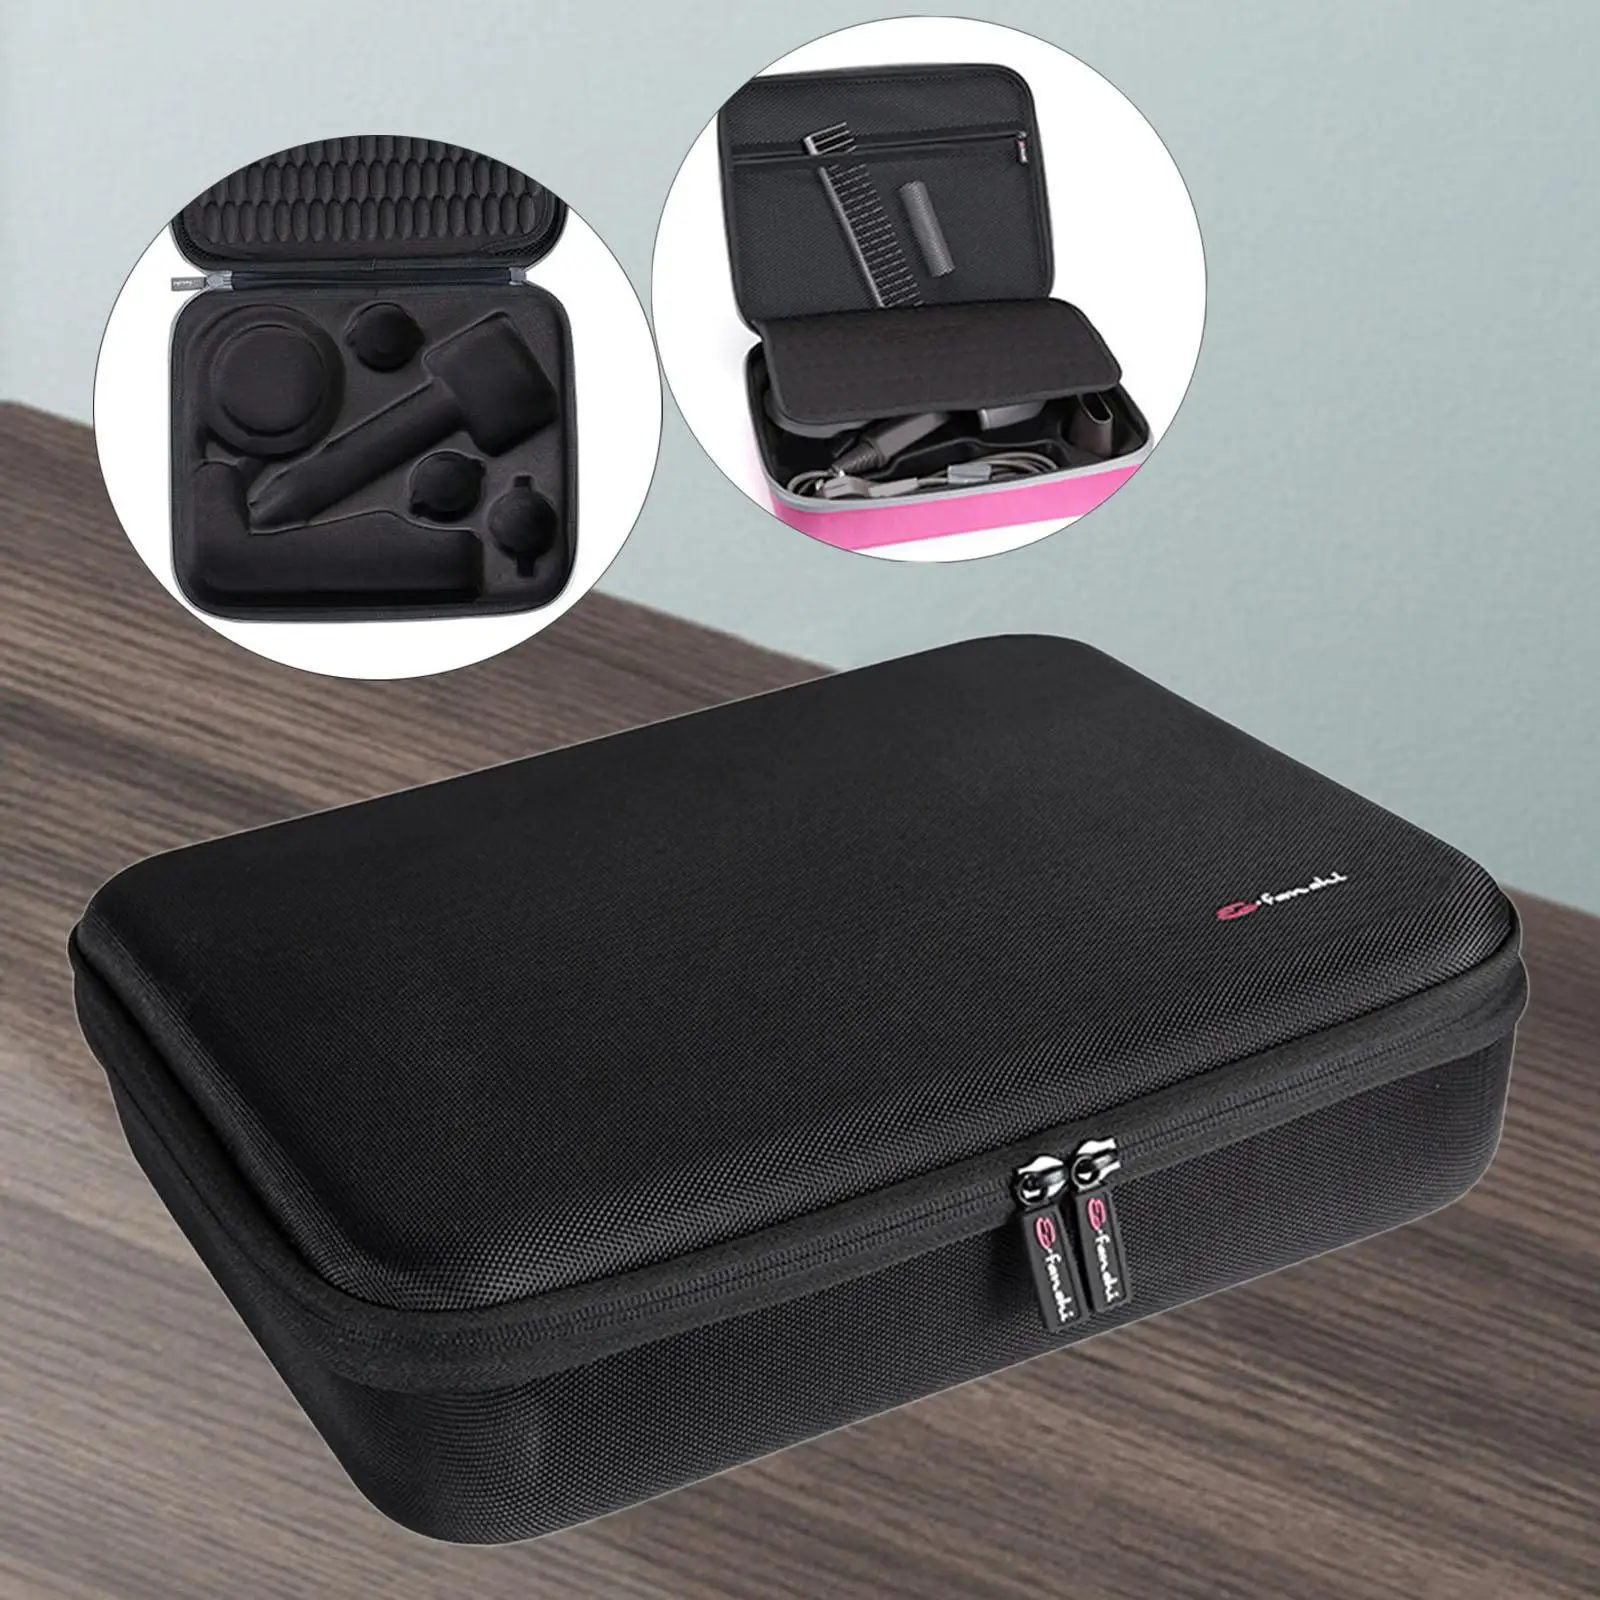 Hair Dryer Case for Hair Dryer, Extra Storage Space for Accessories ? Travel Carrier Case Bag